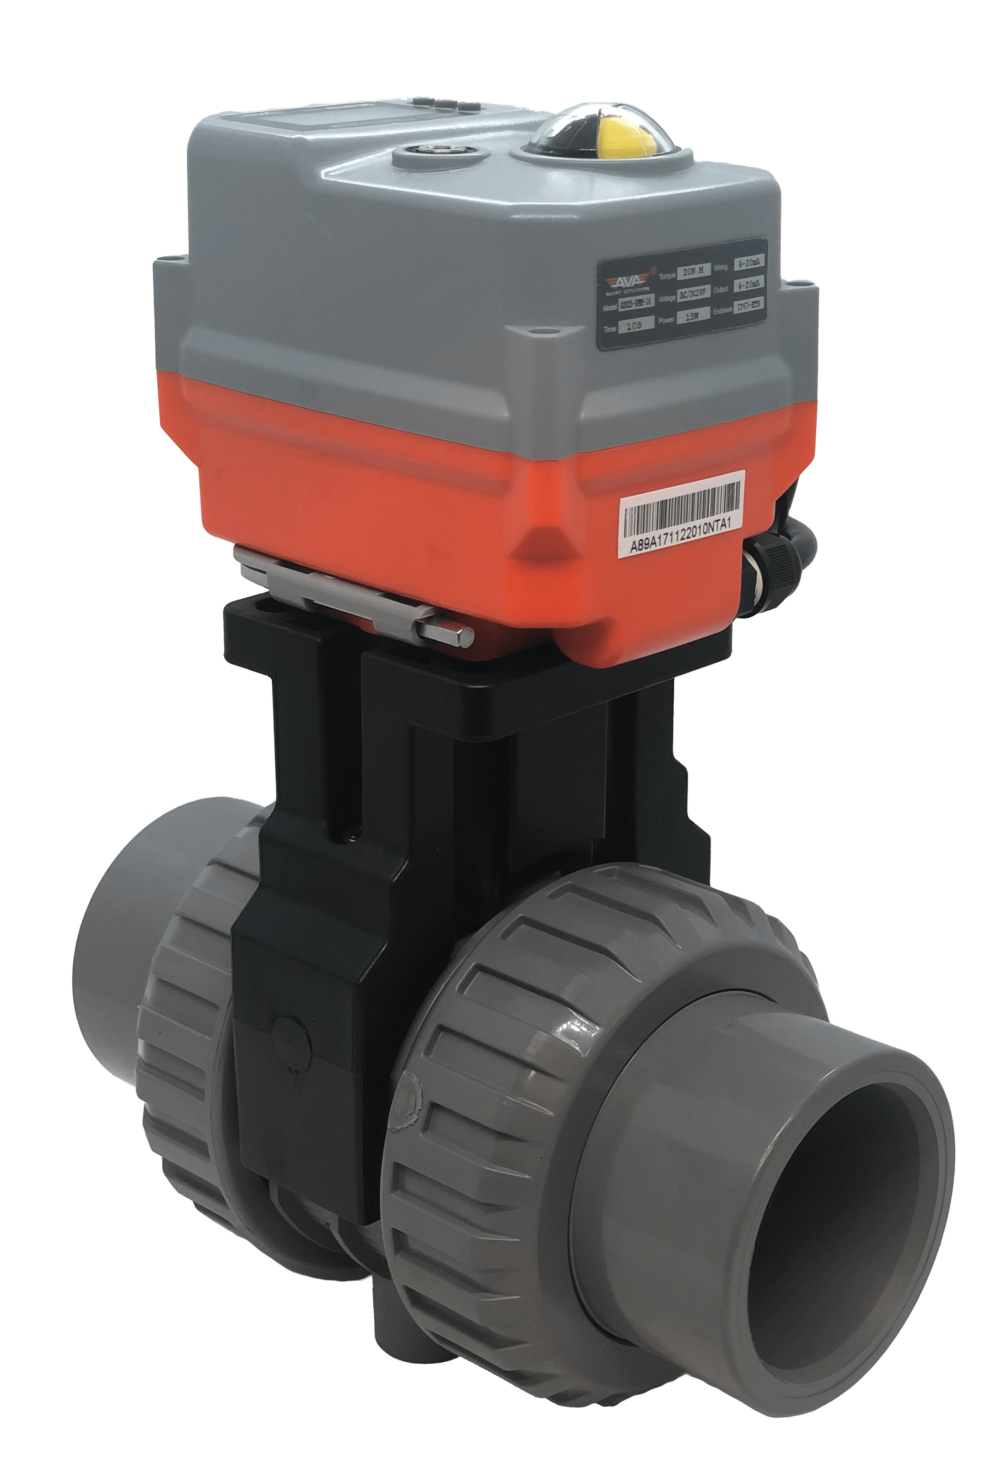 Cepex Extreme Motorized PVC Ball Valve with AVA Electric Actuator from AVS